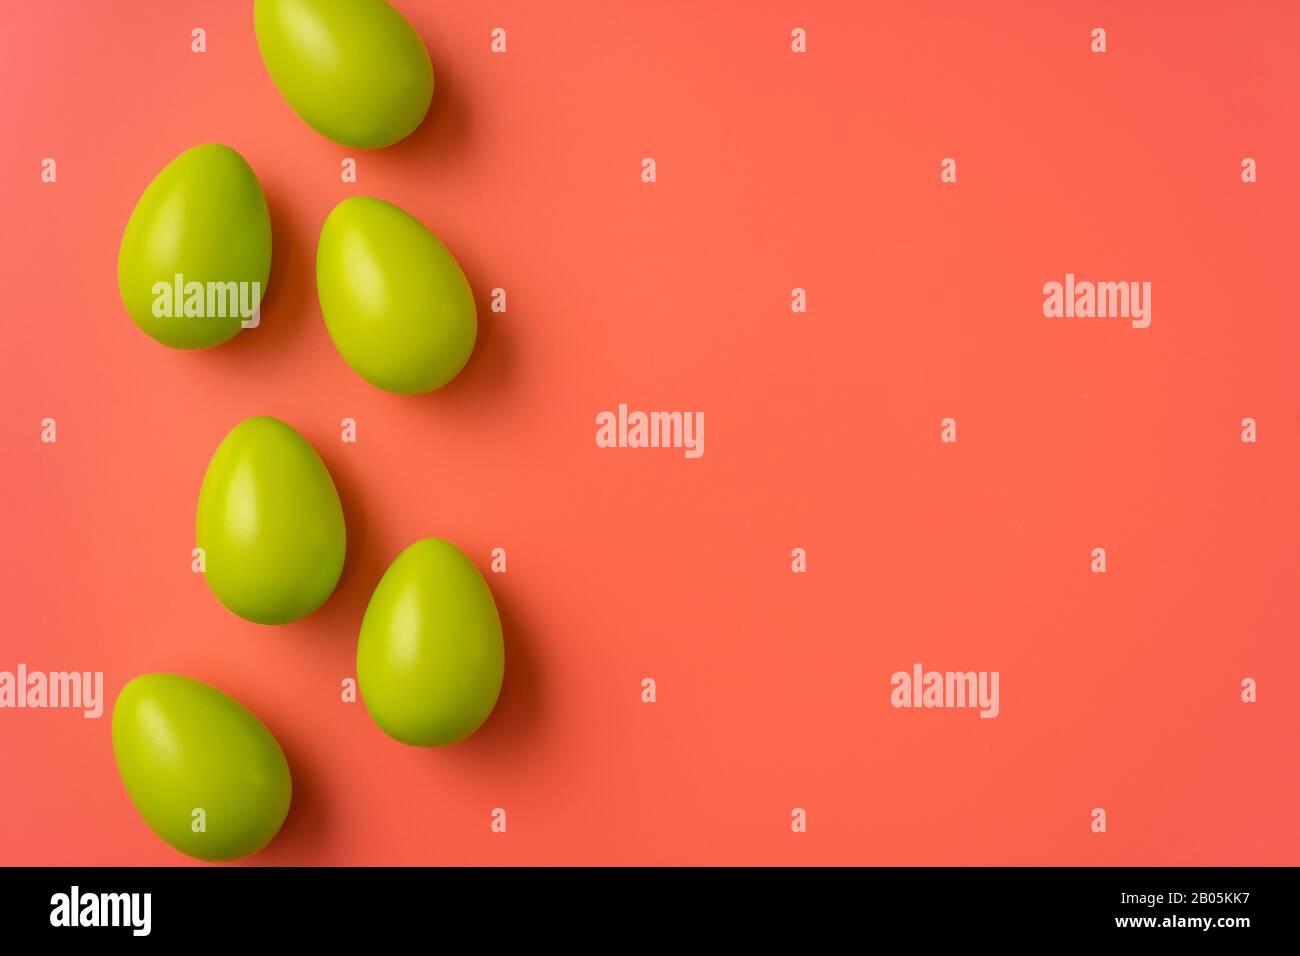 Easter concept. Simple composition with green eggs on vibrant orange background Stock Photo